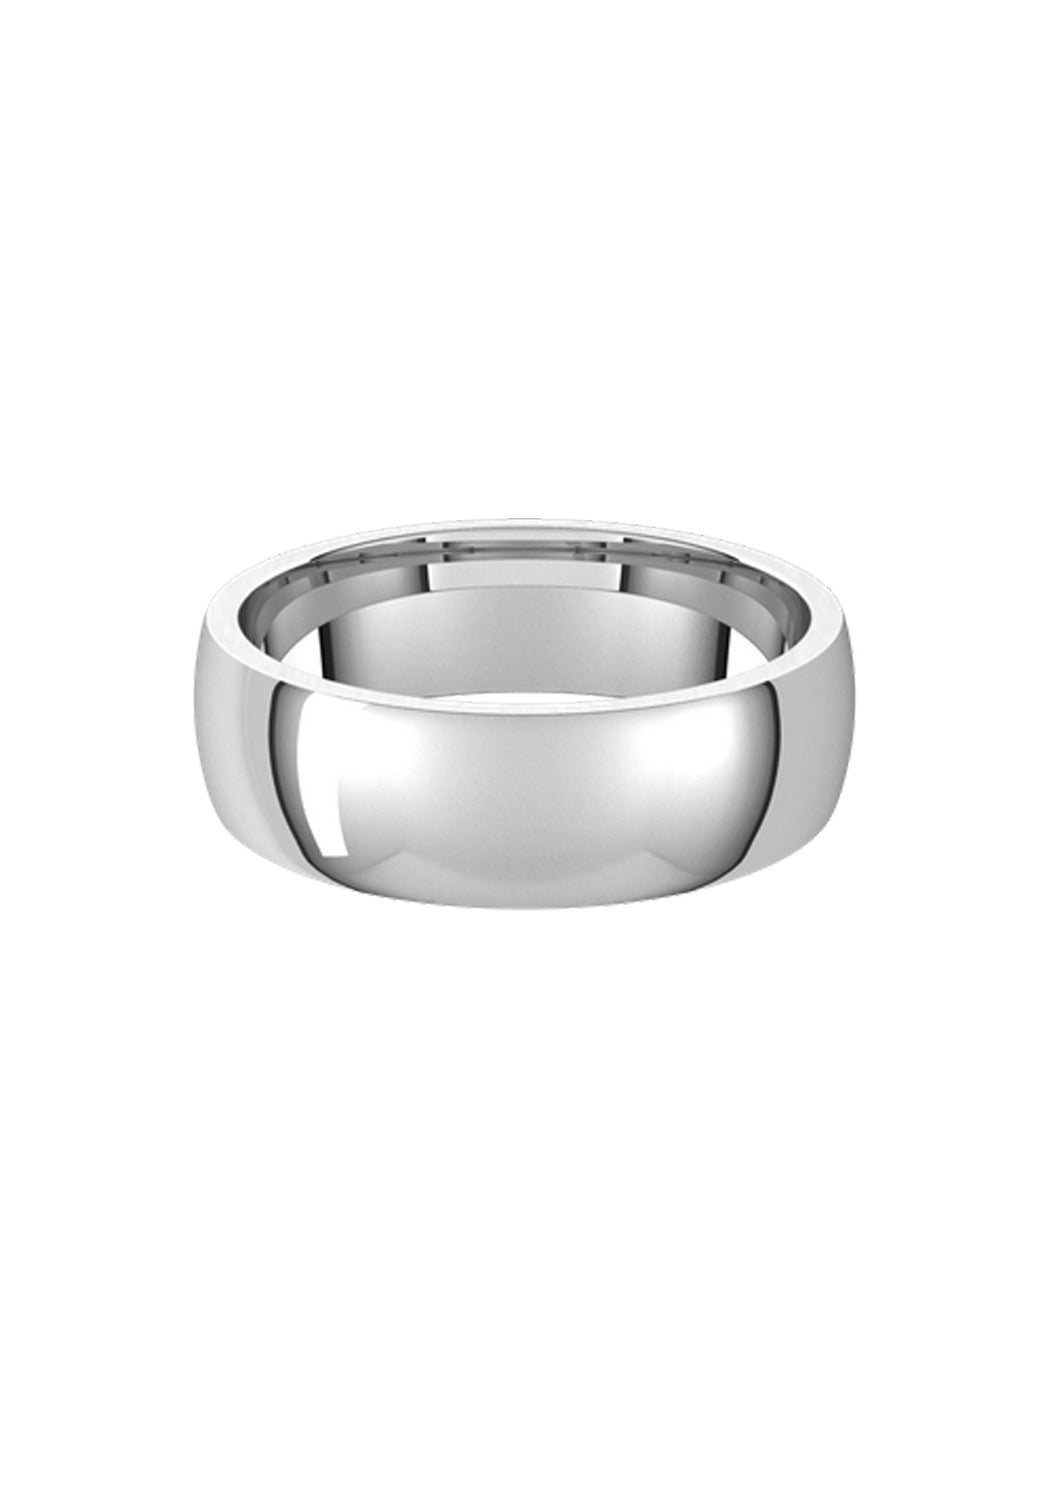 14K White Gold 6mm Band | OsterJewelers.com